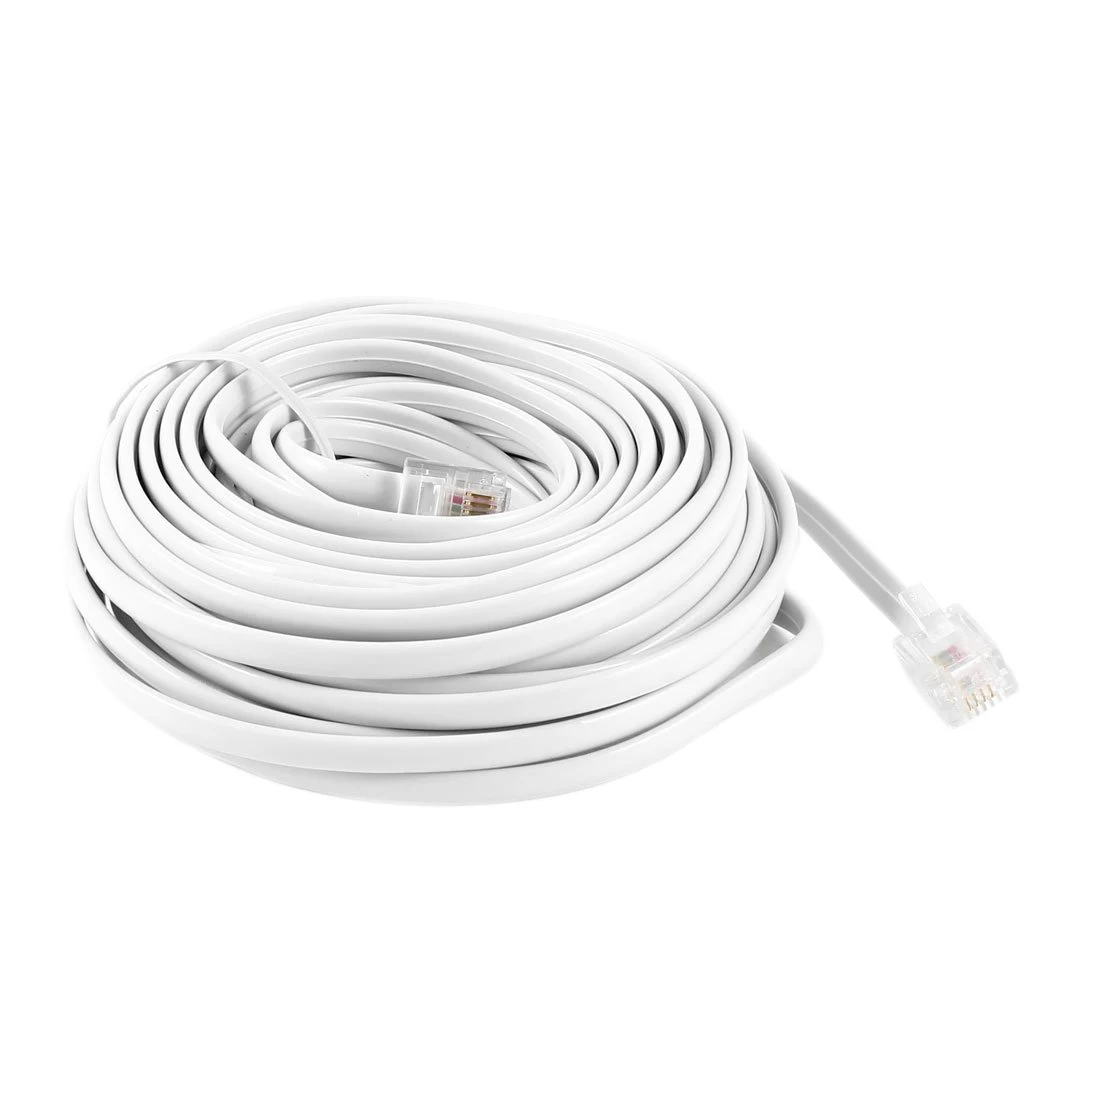 

White RJ11 6P4C Modular Telephone Extension Lead Cable 9M 30ft